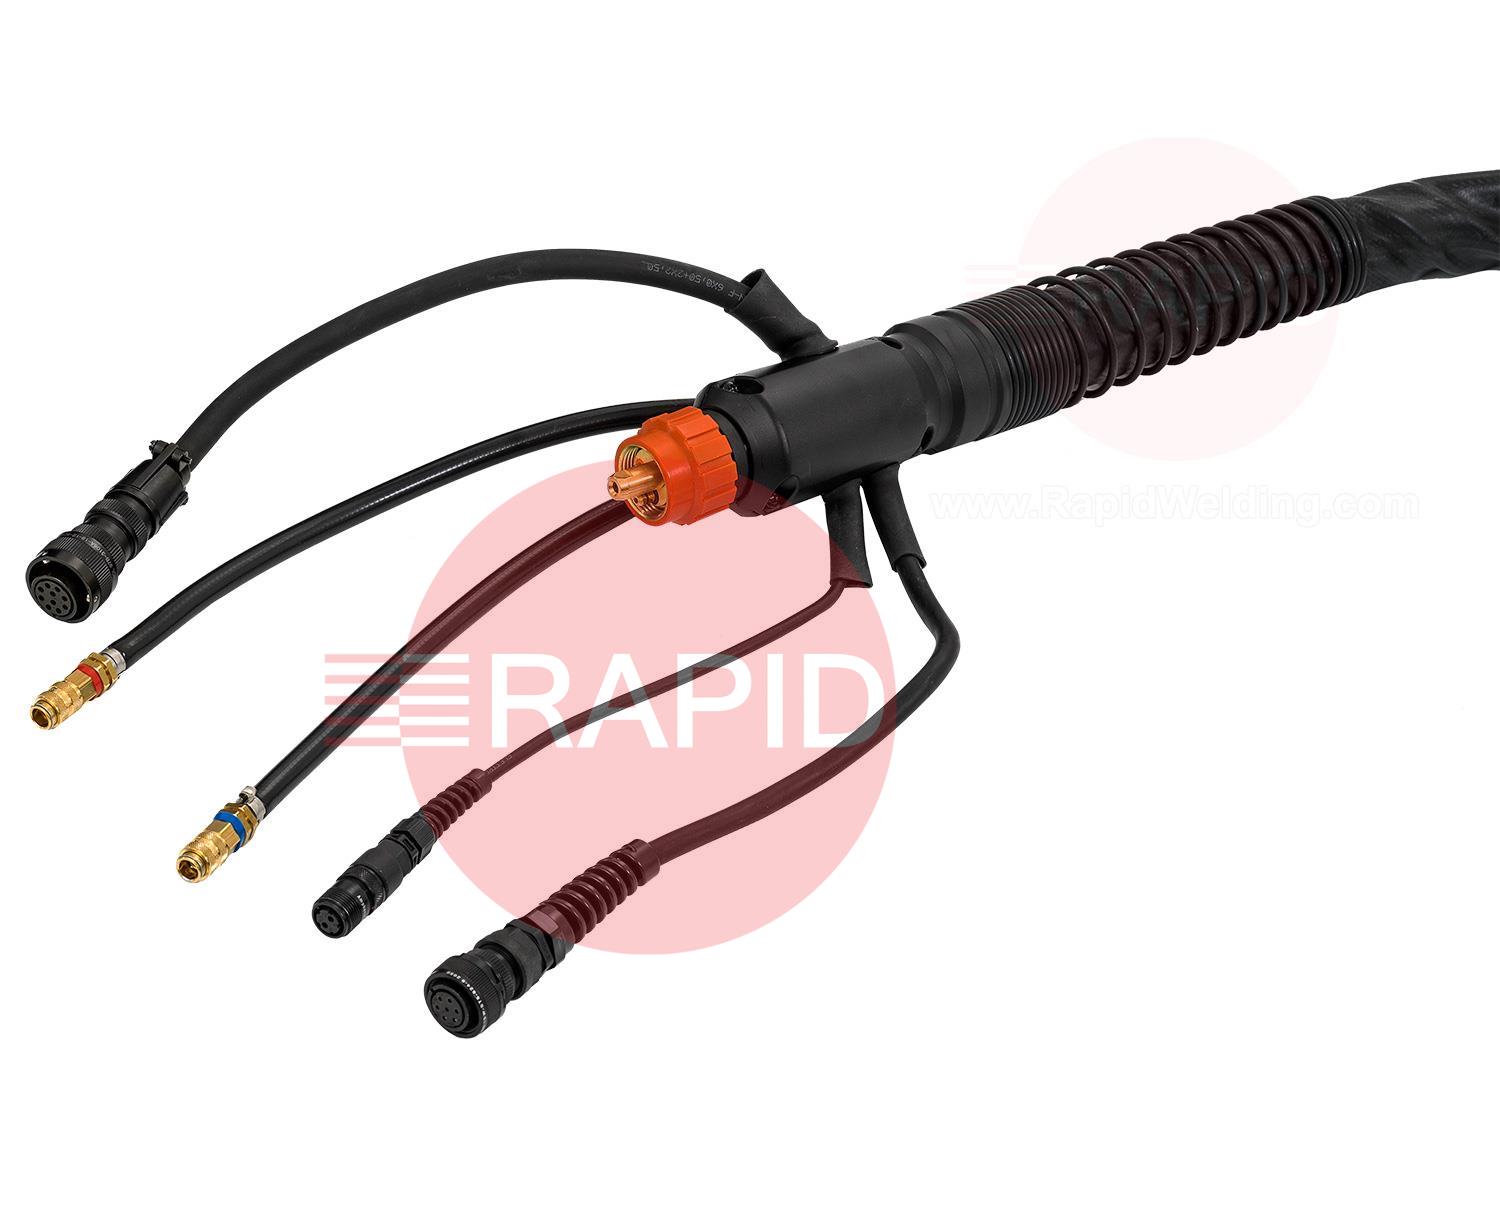 SGTXW107CBL  Kemppi Supersnake GTX Water Cooled Interconnection Cable (Std Liner FE 1.0-1.6mm) - 10m / 70mm2